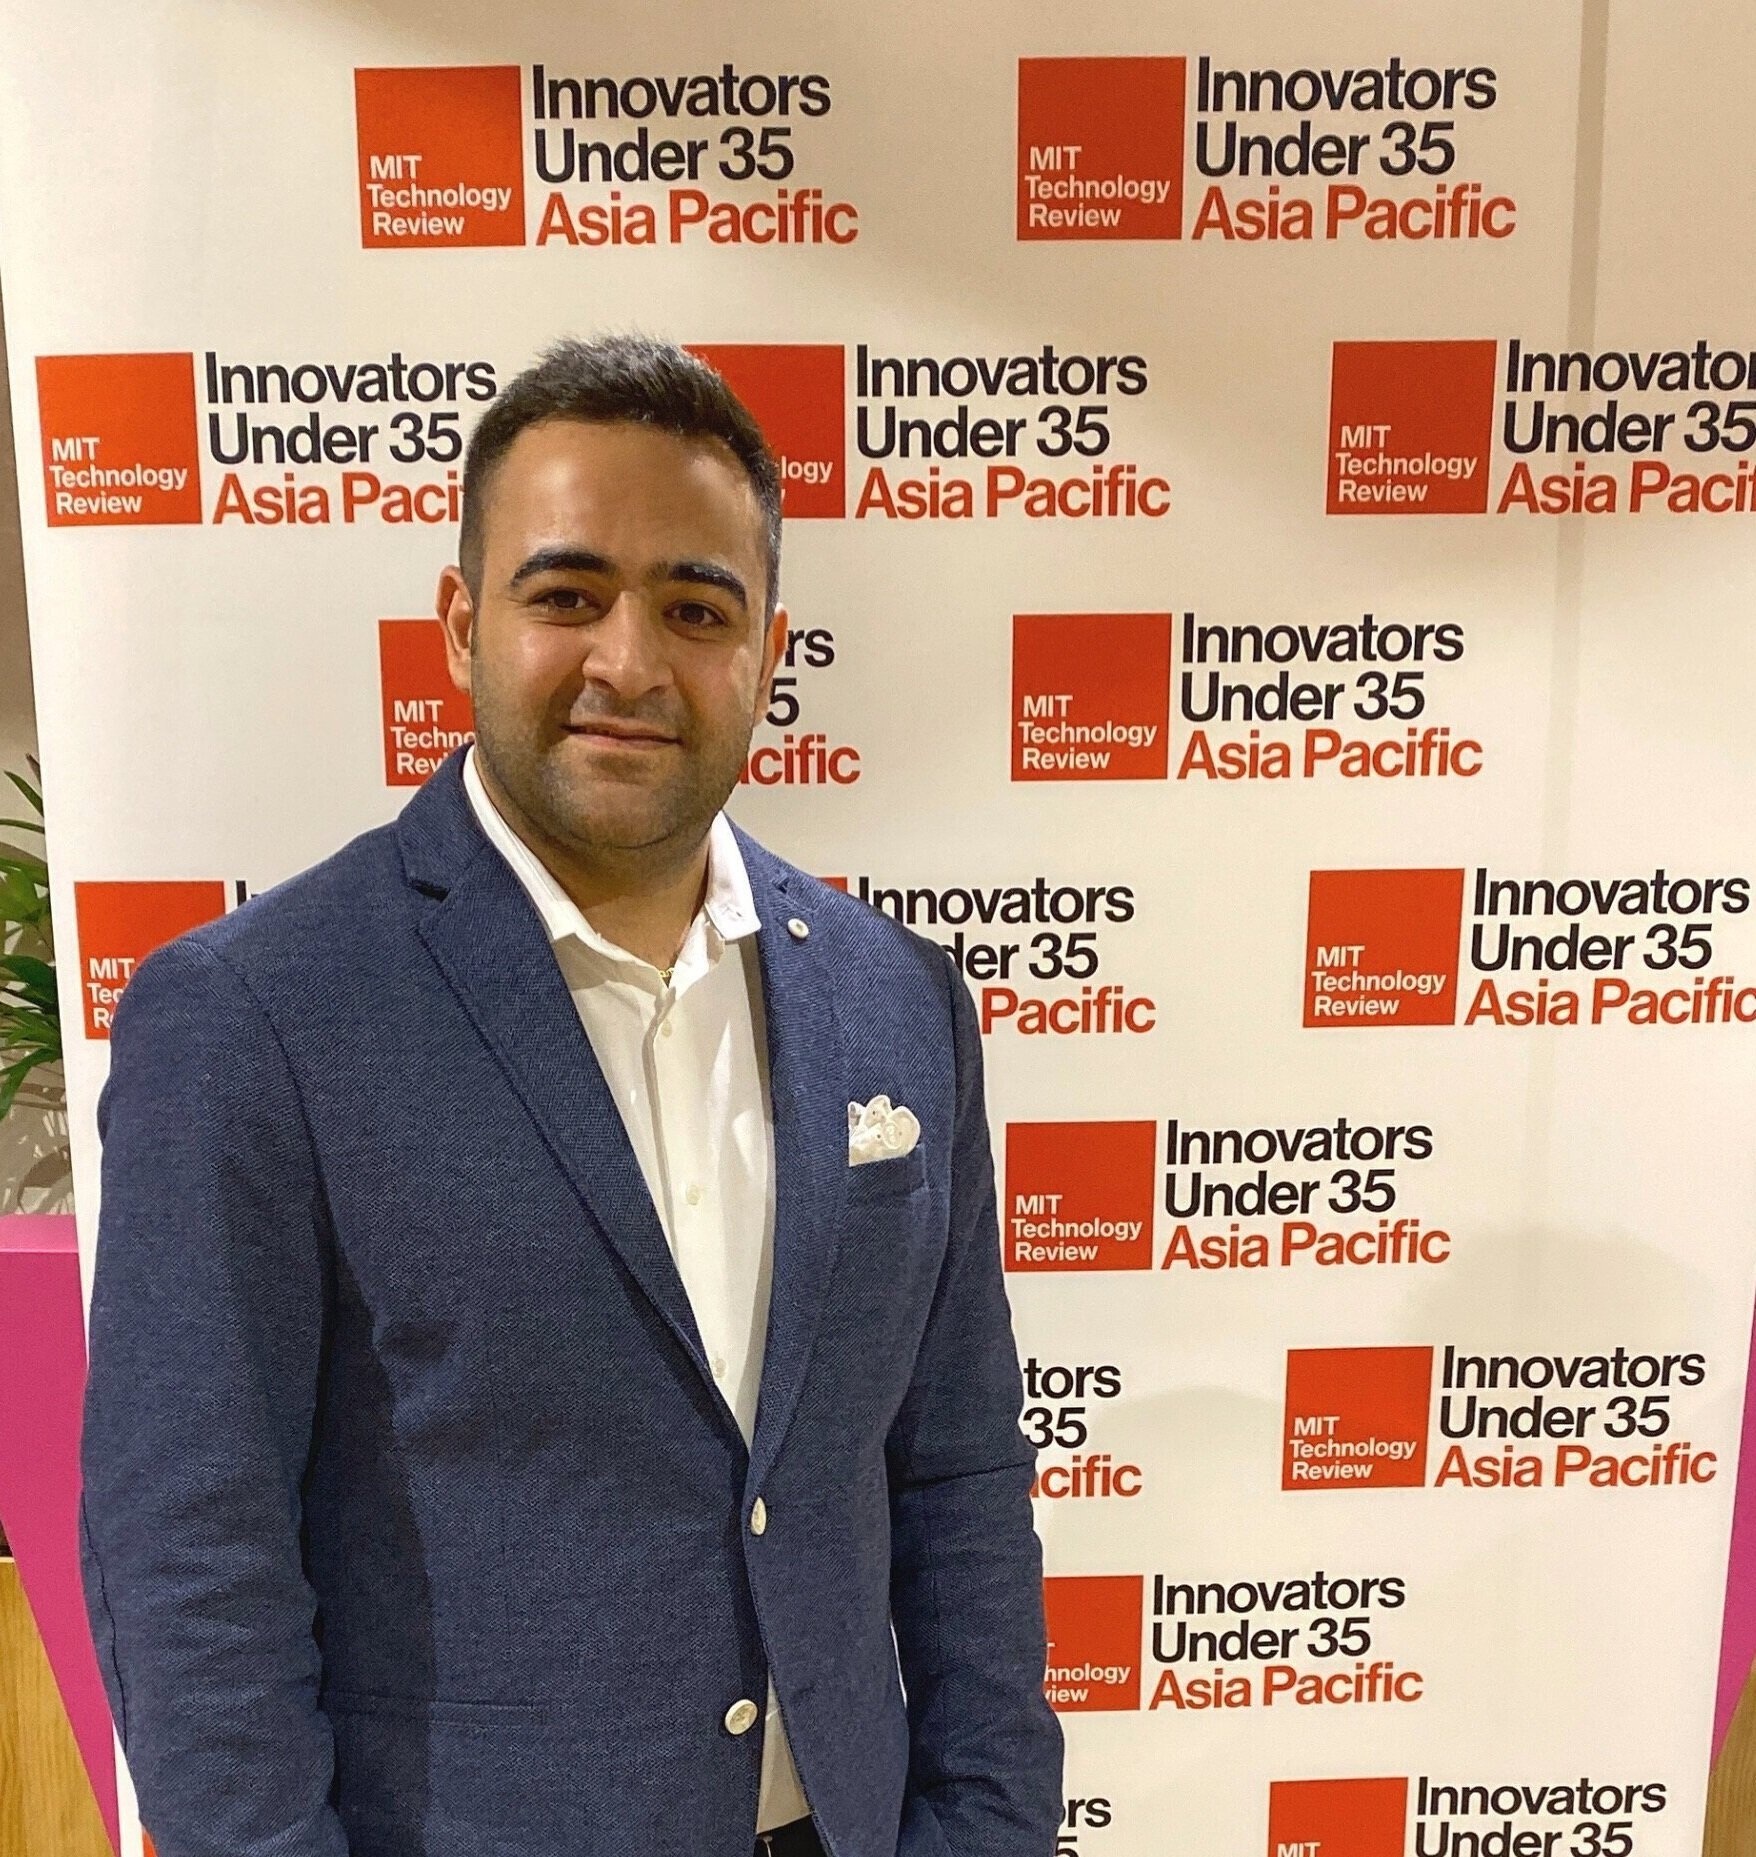 Dr. Farahani (CEO) receives Innovators Under 35 Award by MIT Technology Review